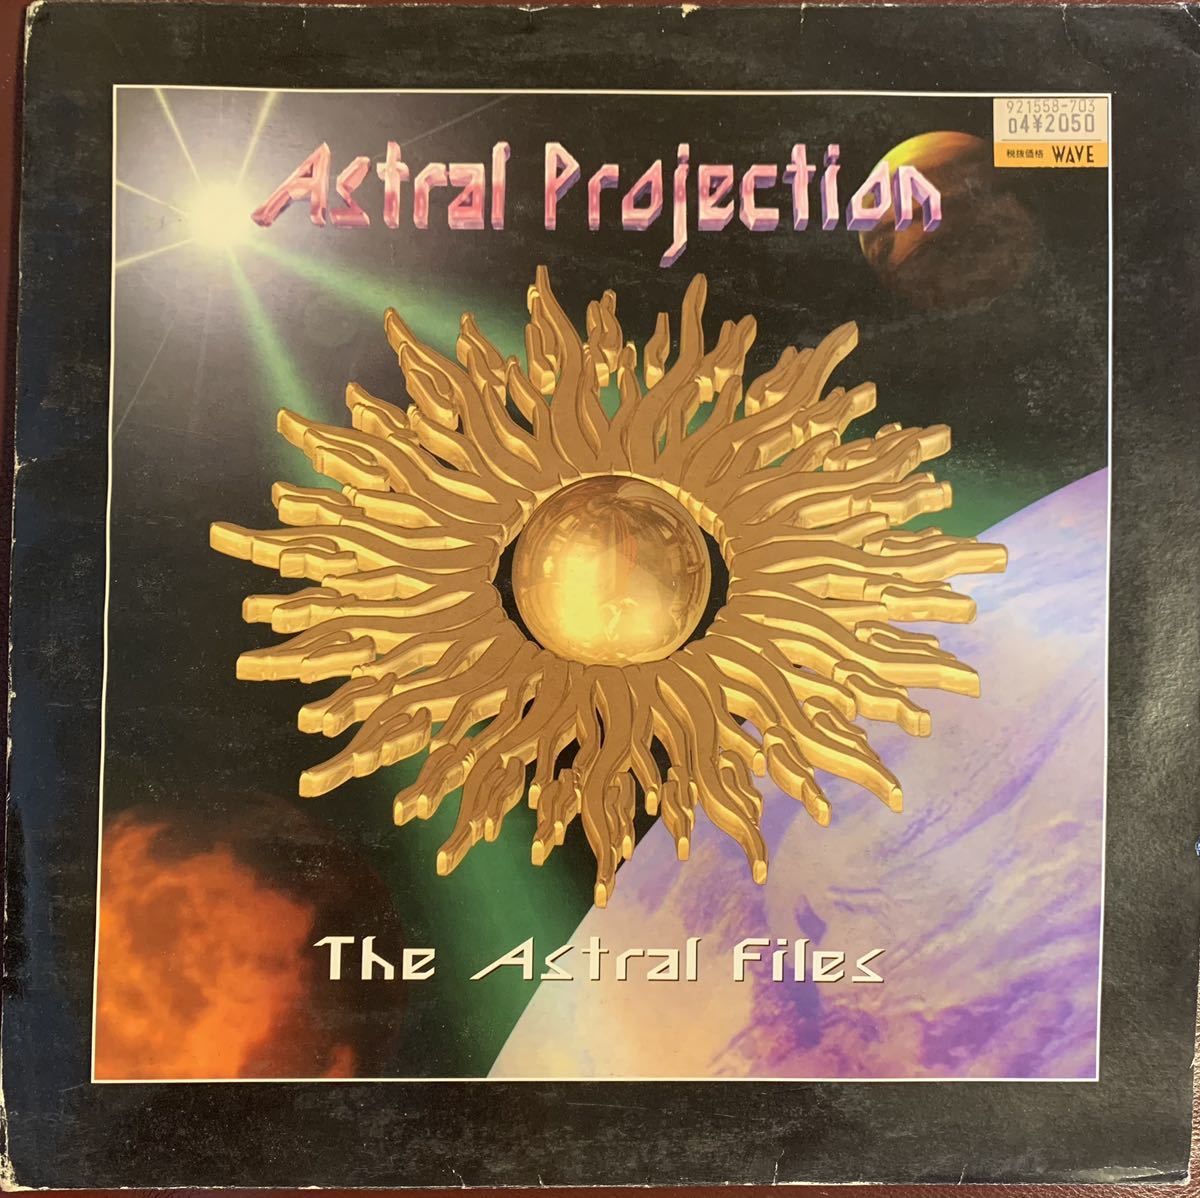 Astral Projection 2LP ゴアトランス Doof goa trance Hallucinogen Shpongle Astral Projection Infected Mushroom psy trance_画像1